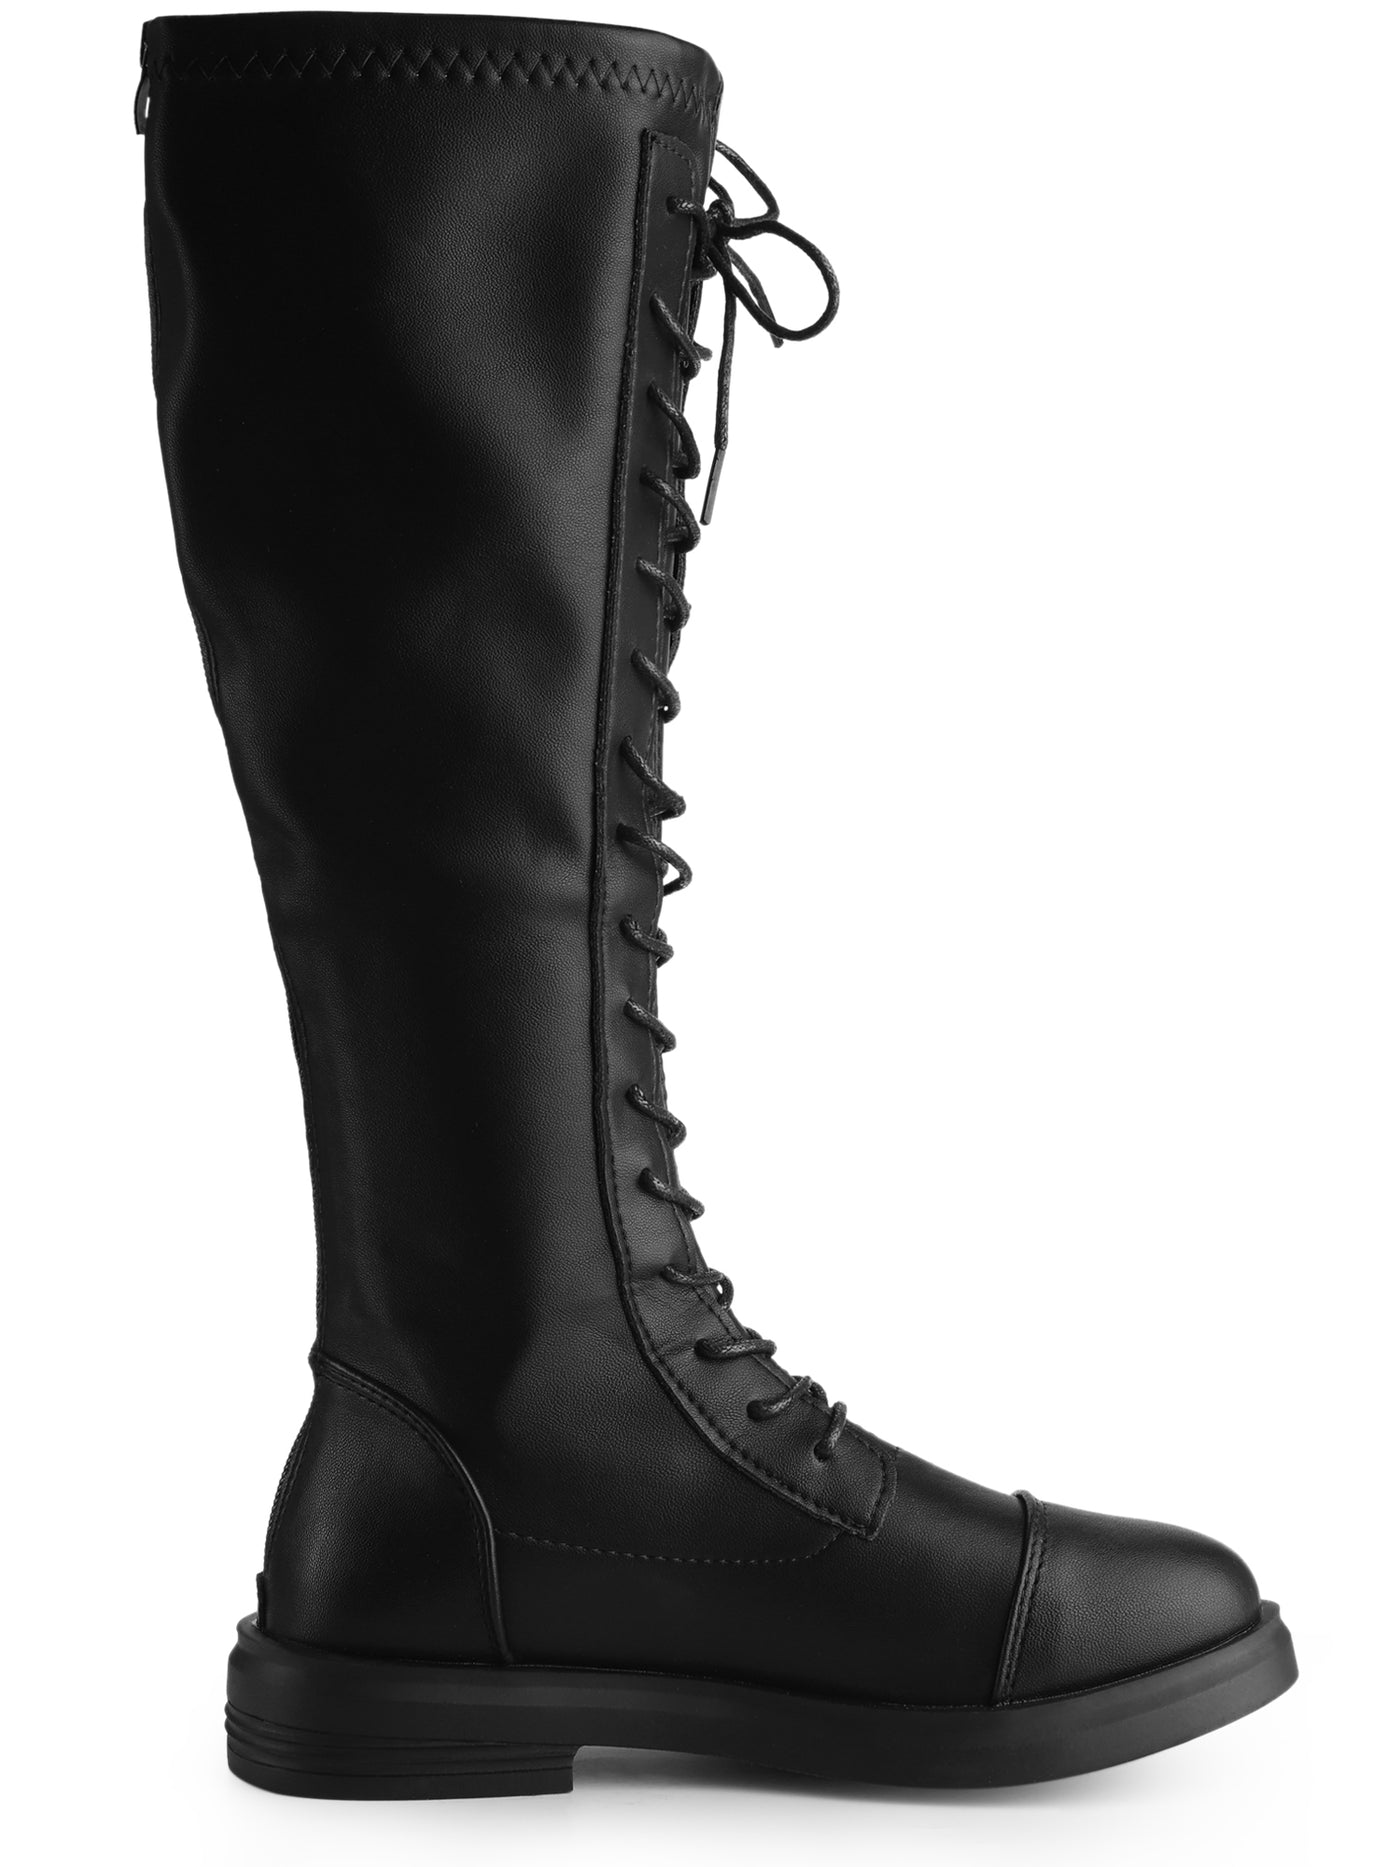 Allegra K Lace Up Round Toe Flat Low Heel Knee High Boots